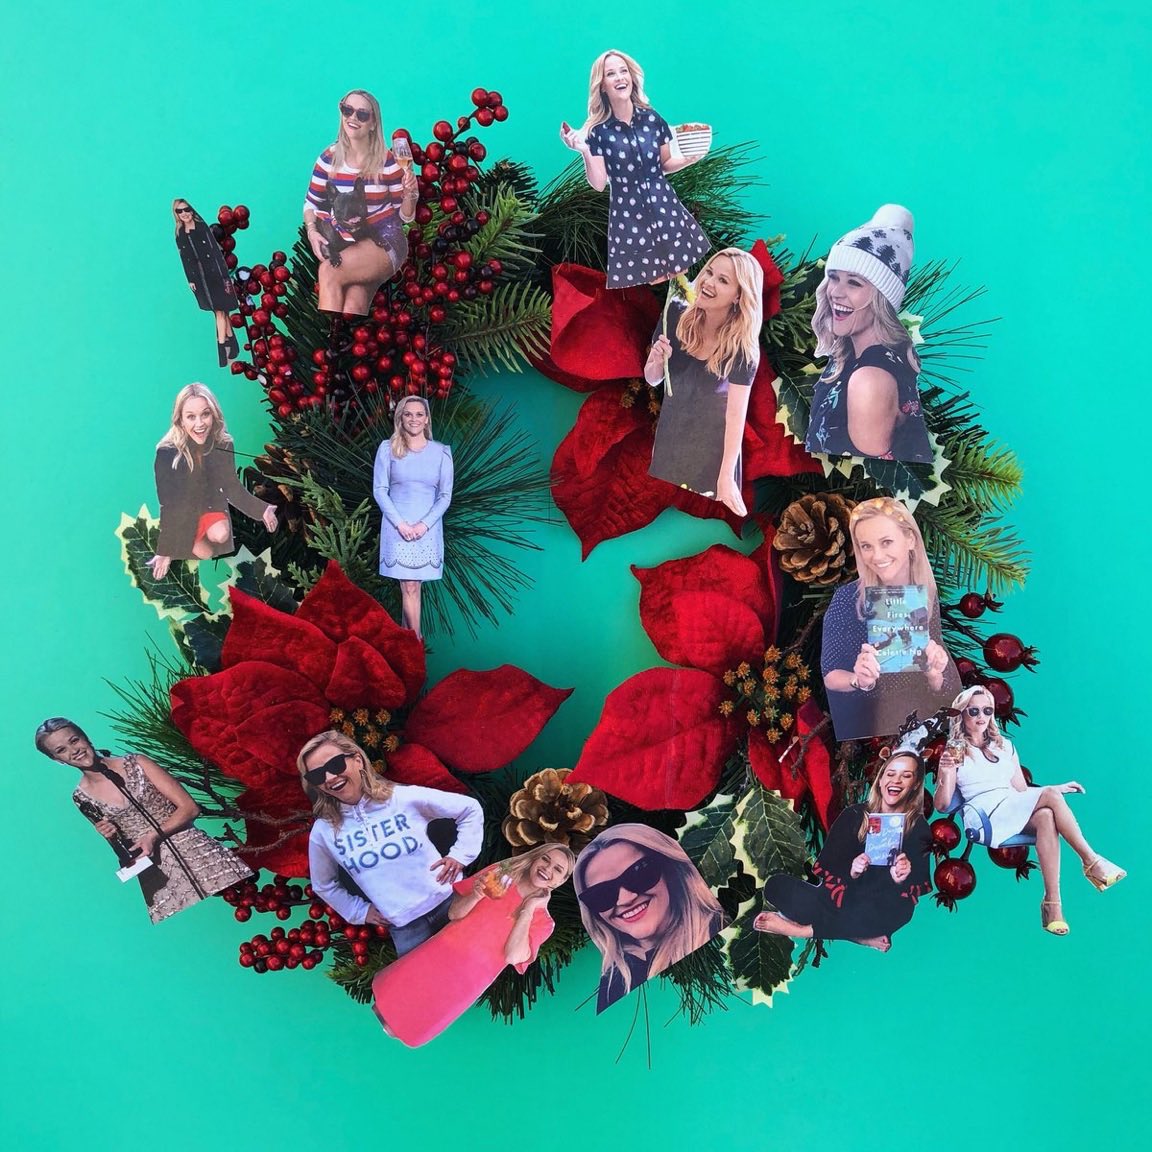 Because everyone needs a festive #WreathWitherspoon... right @mindykaling!? ????❤️ https://t.co/GWhD9mBJUc